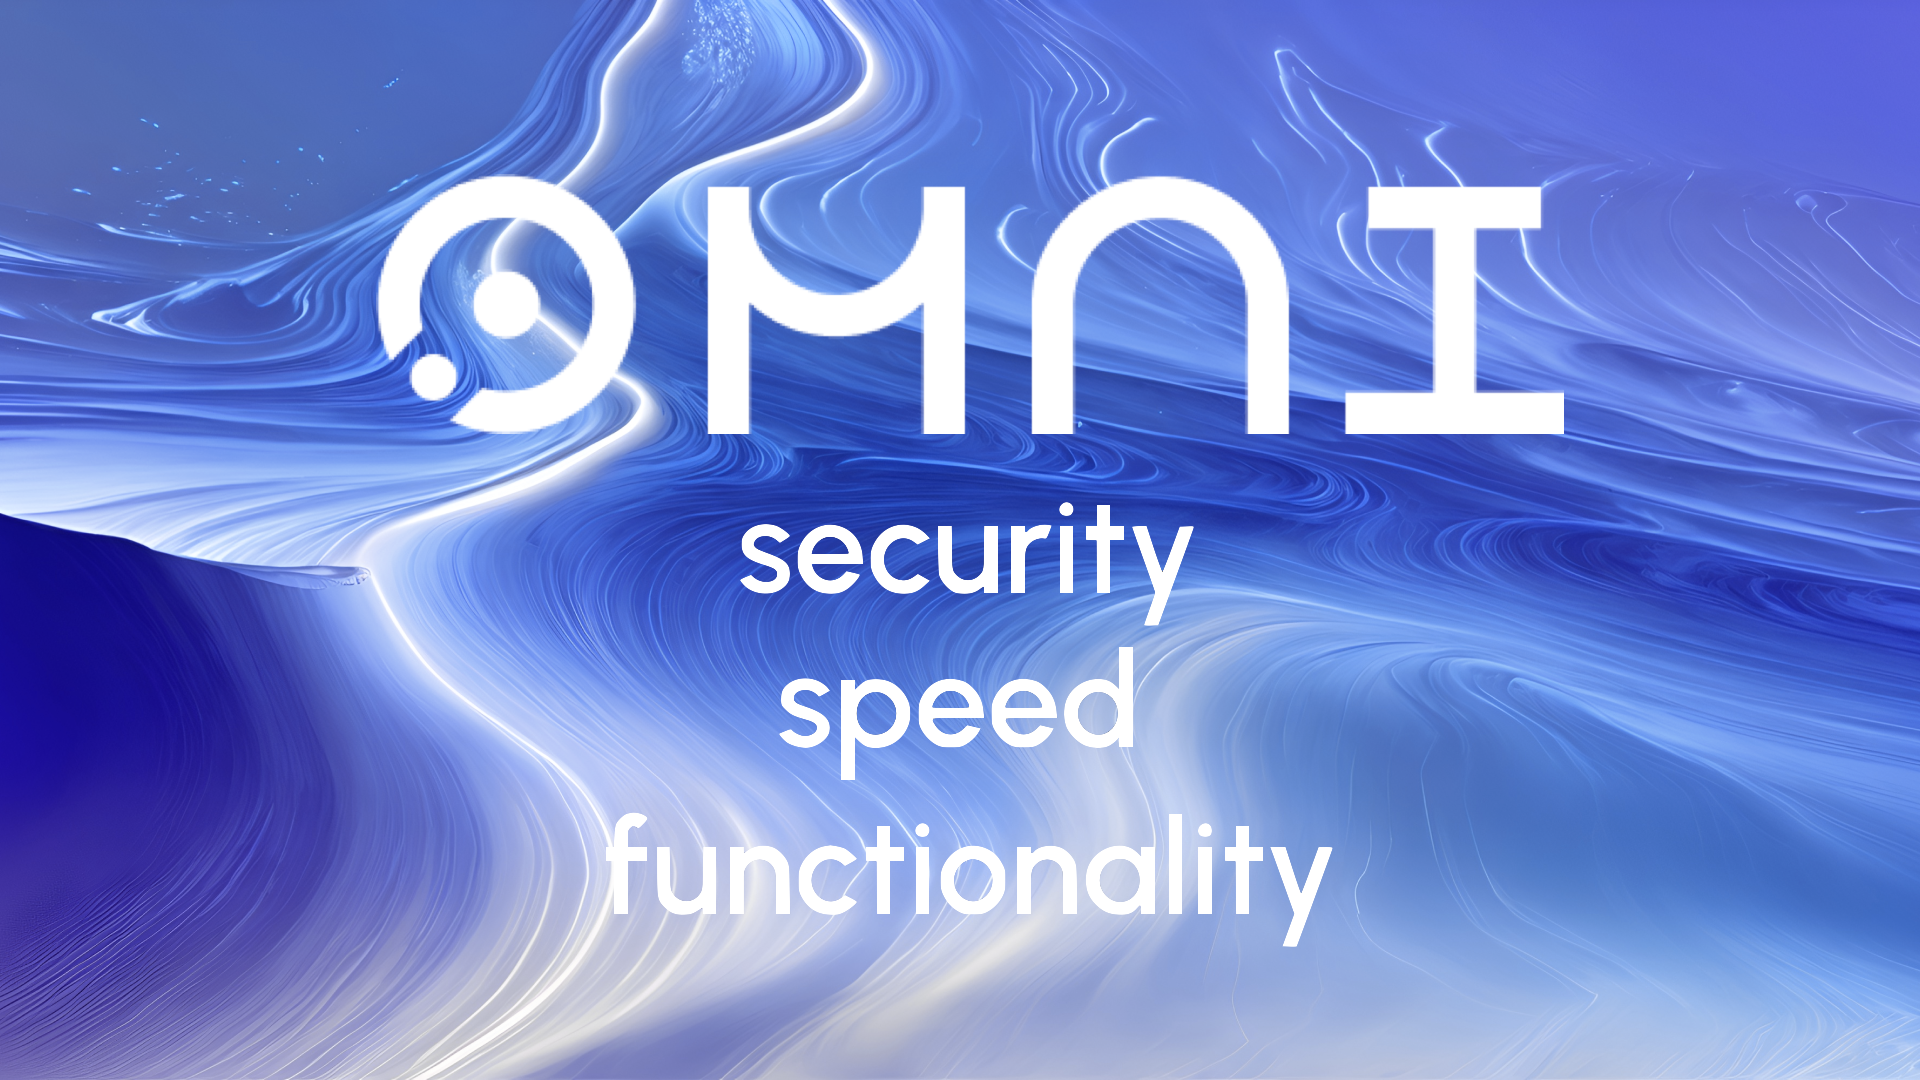 Omni - Security Speed & Functionality